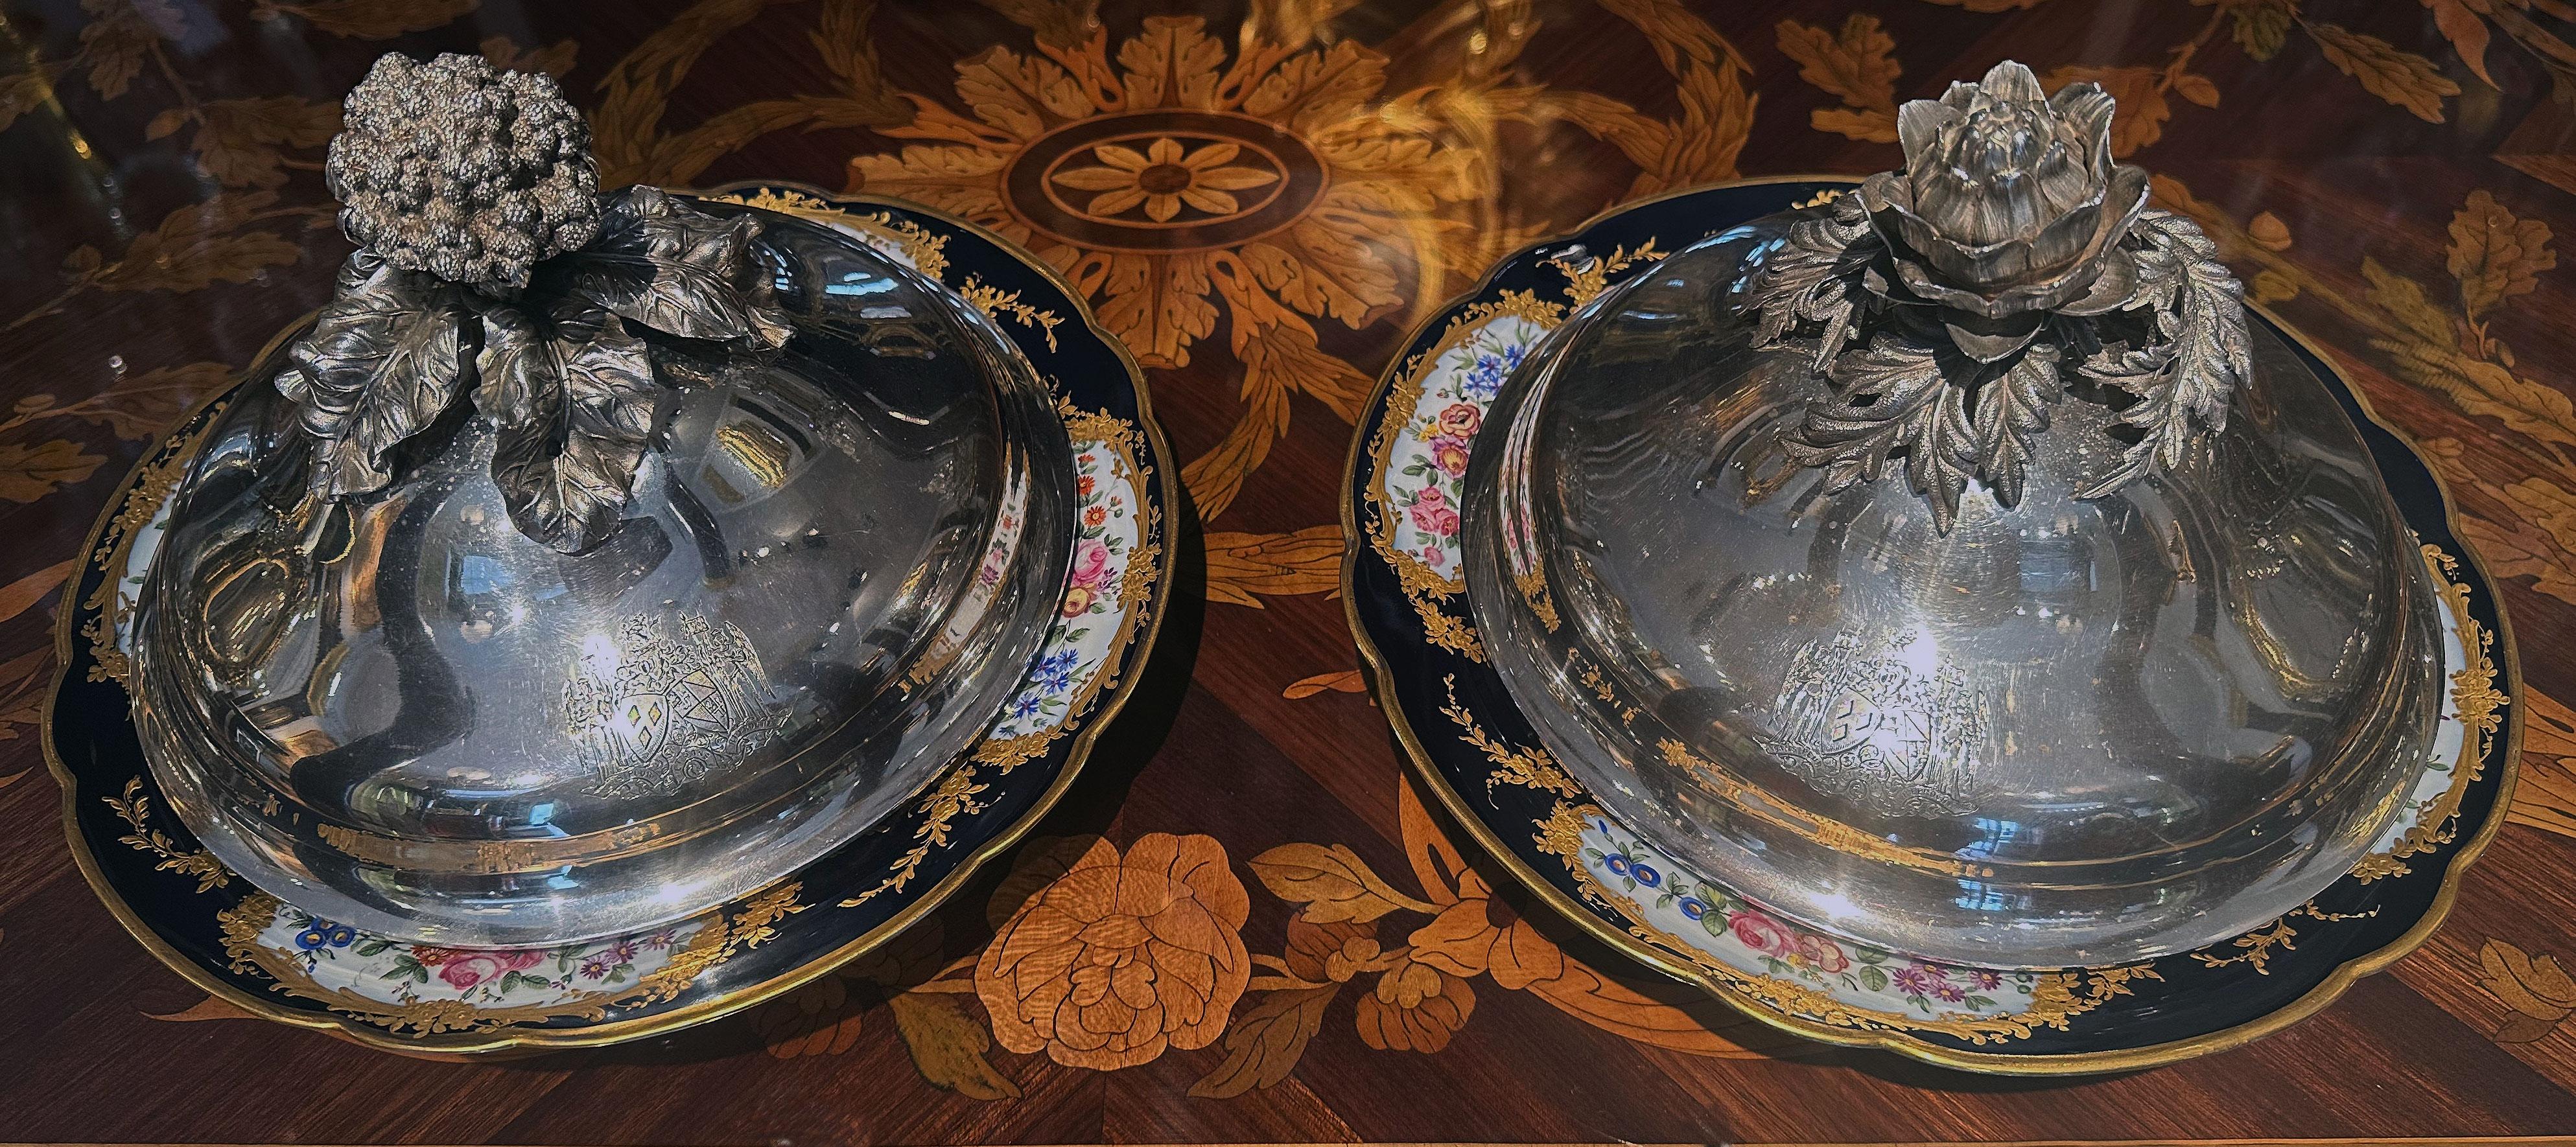 Pair of  French Silver 19th Century Plates Domes Covers .France
Minerva Hallmark – Total Weight 1,425 kg
Engraved with the Charpin-Feugerolles coats of arms family, Counts of Souzy
This Pair of  silver plates domes cover, the first with a